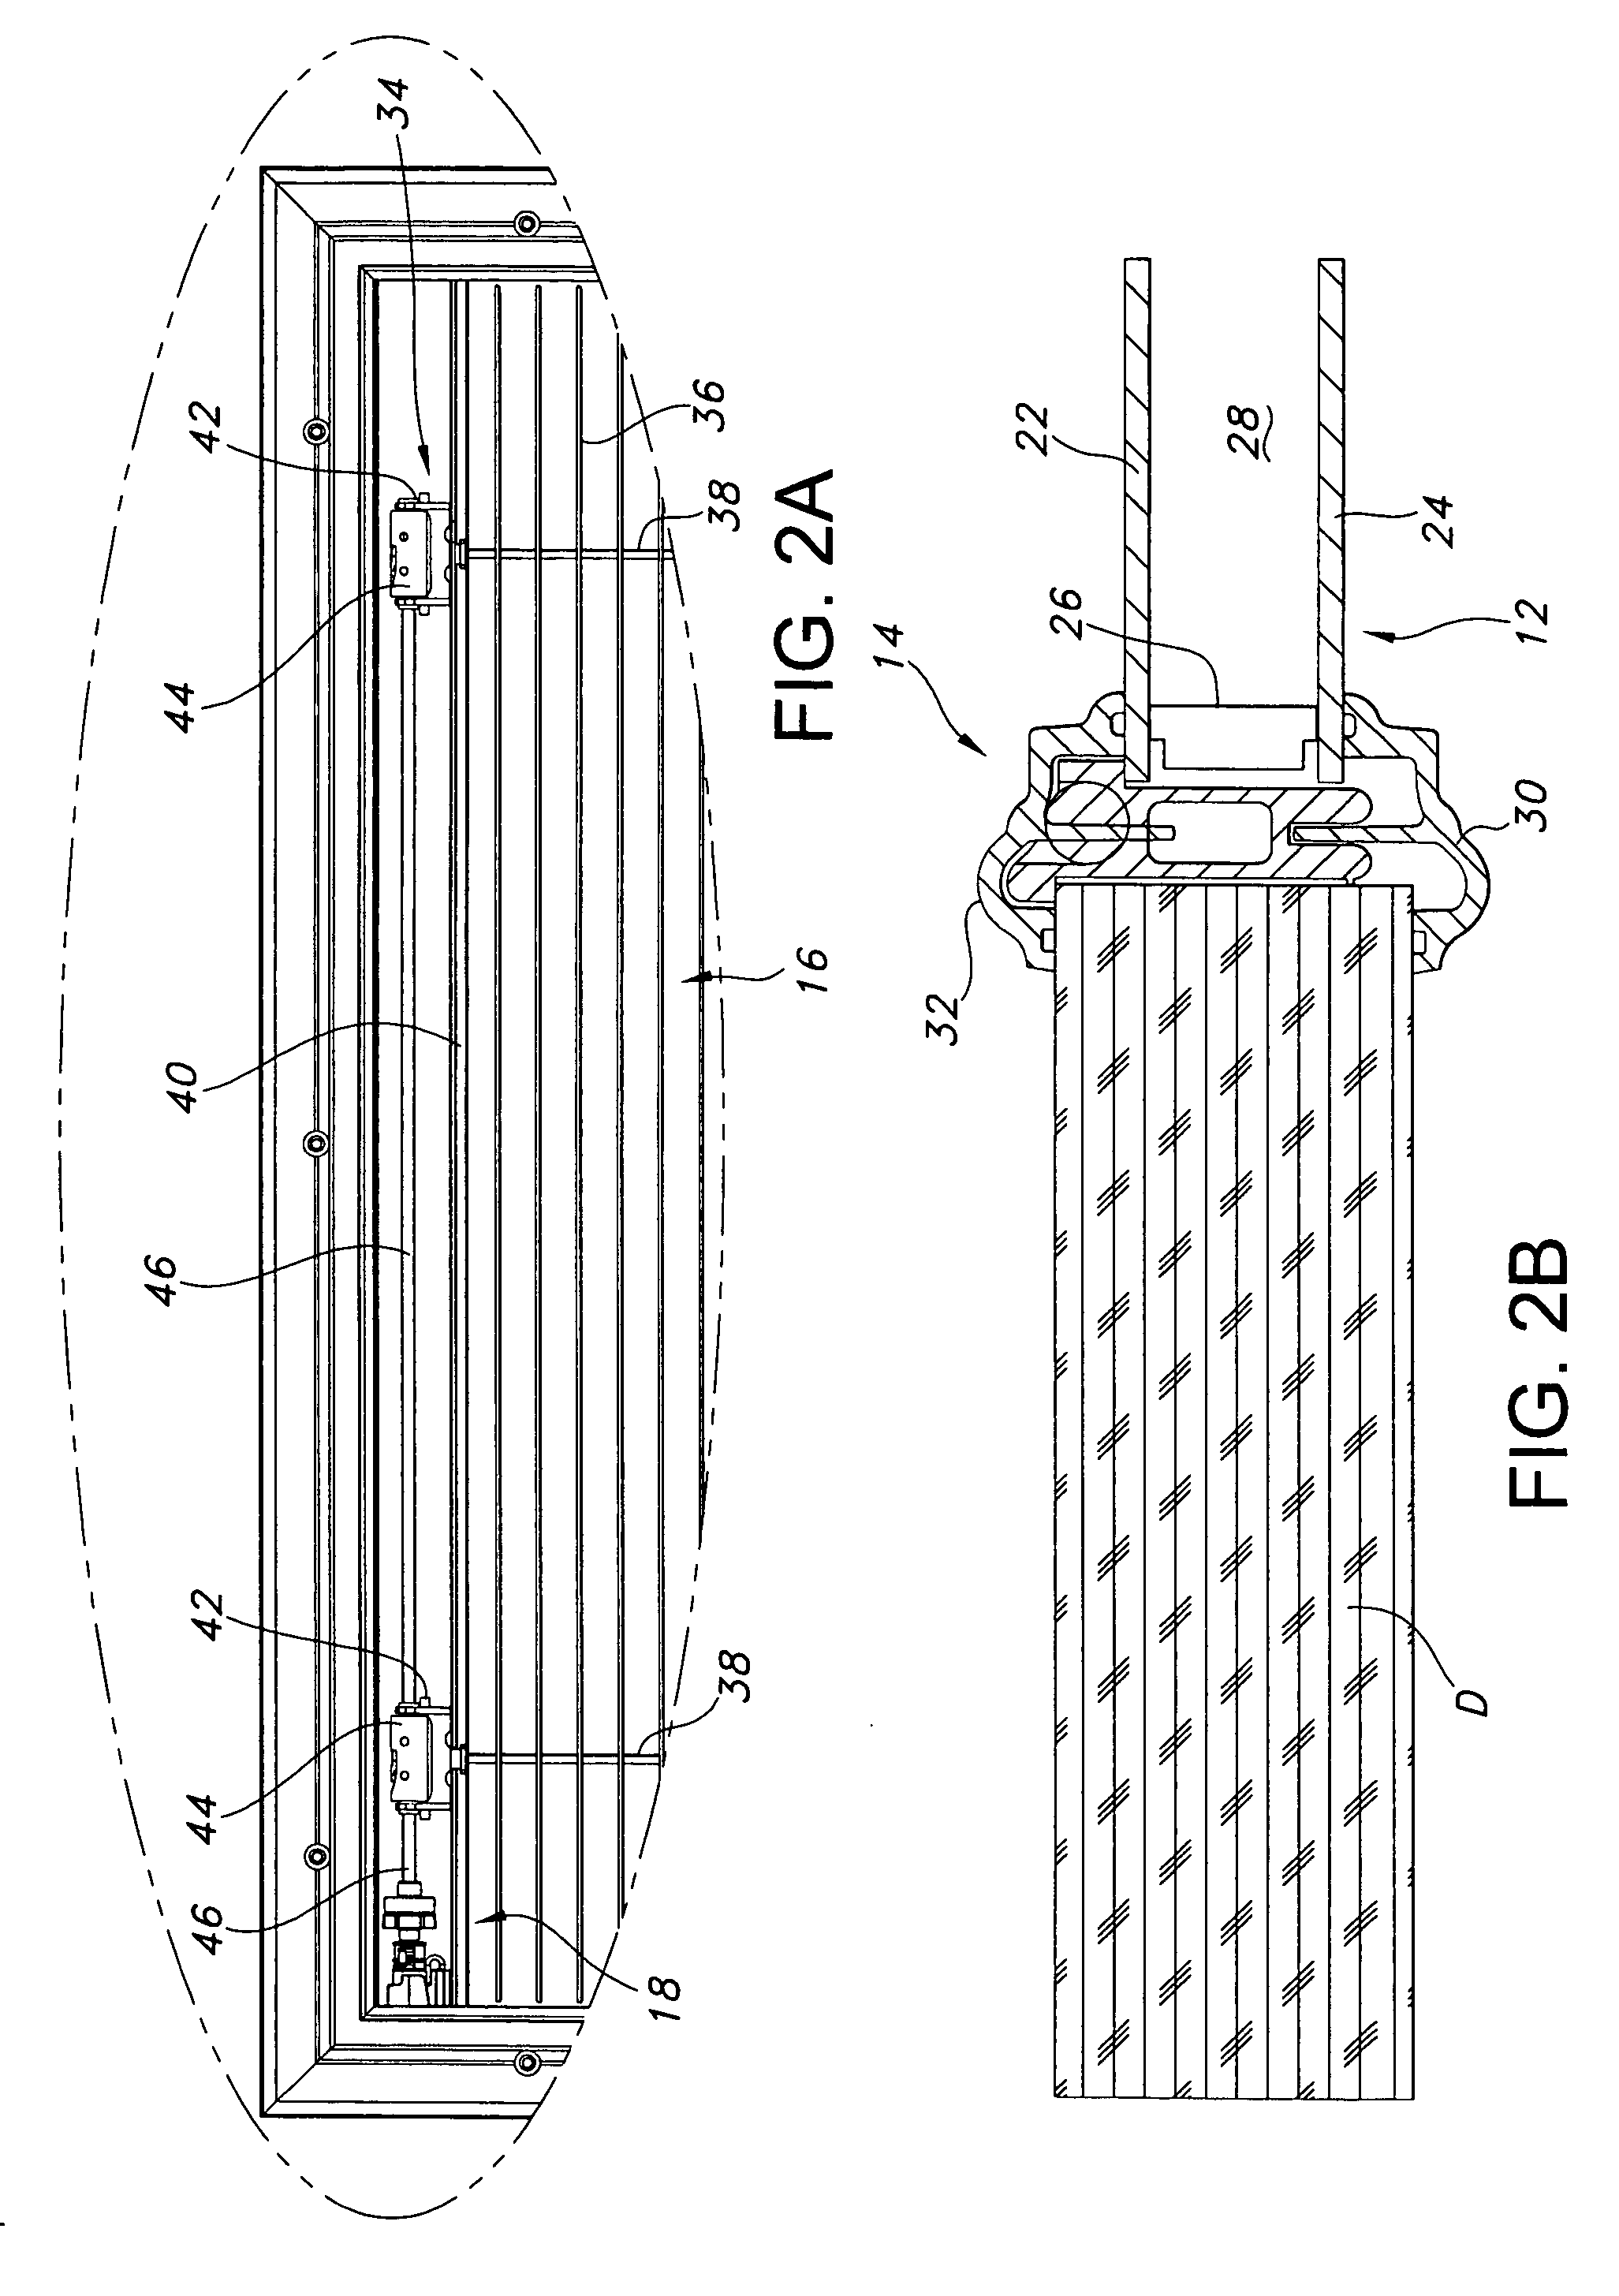 Door glass assembly with powered blind